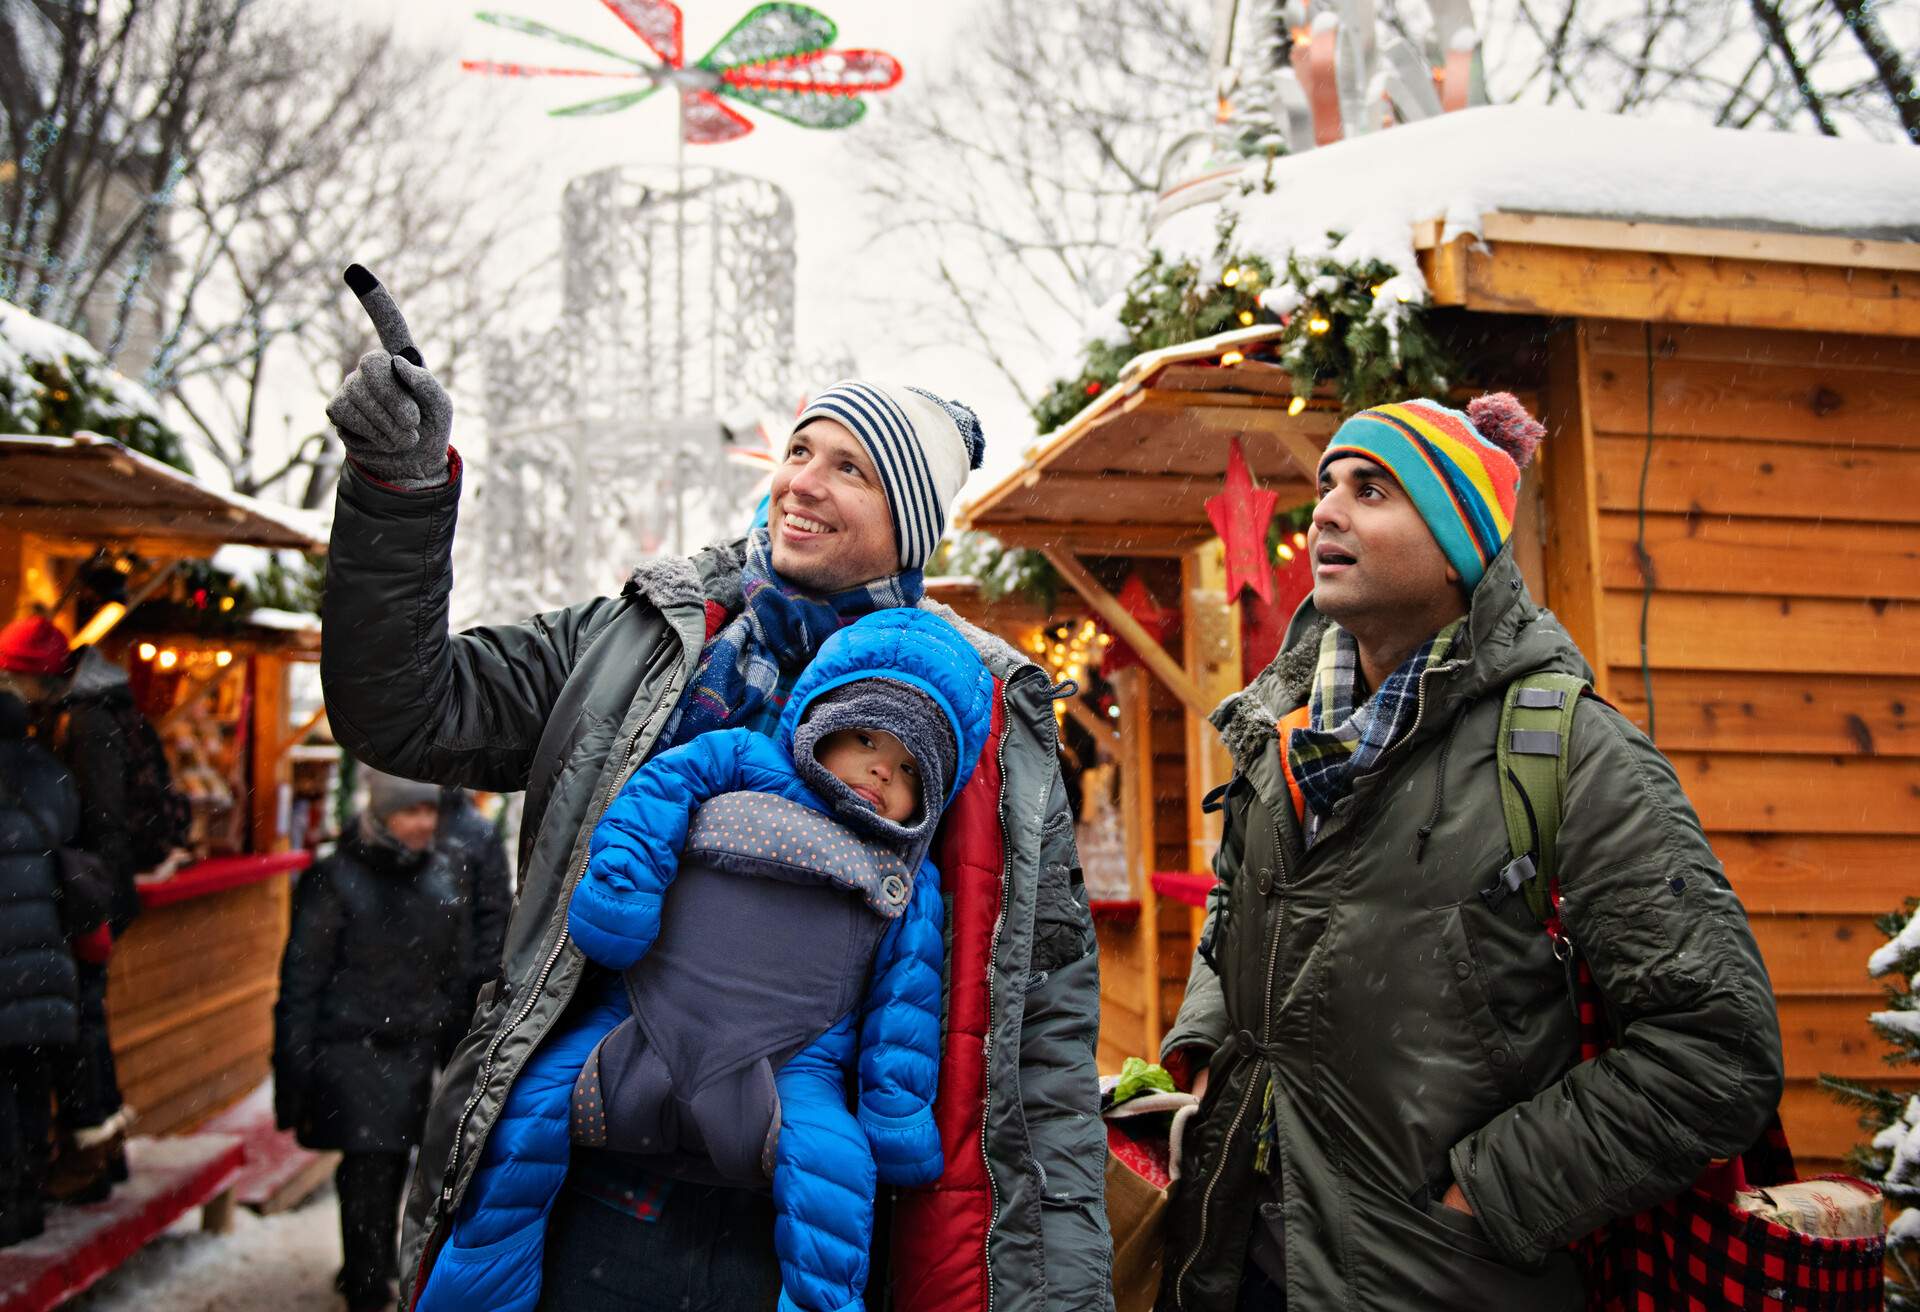 A couple with their child on a baby carrier backpack, wearing their winter clothes, on a snowy Christmas market.